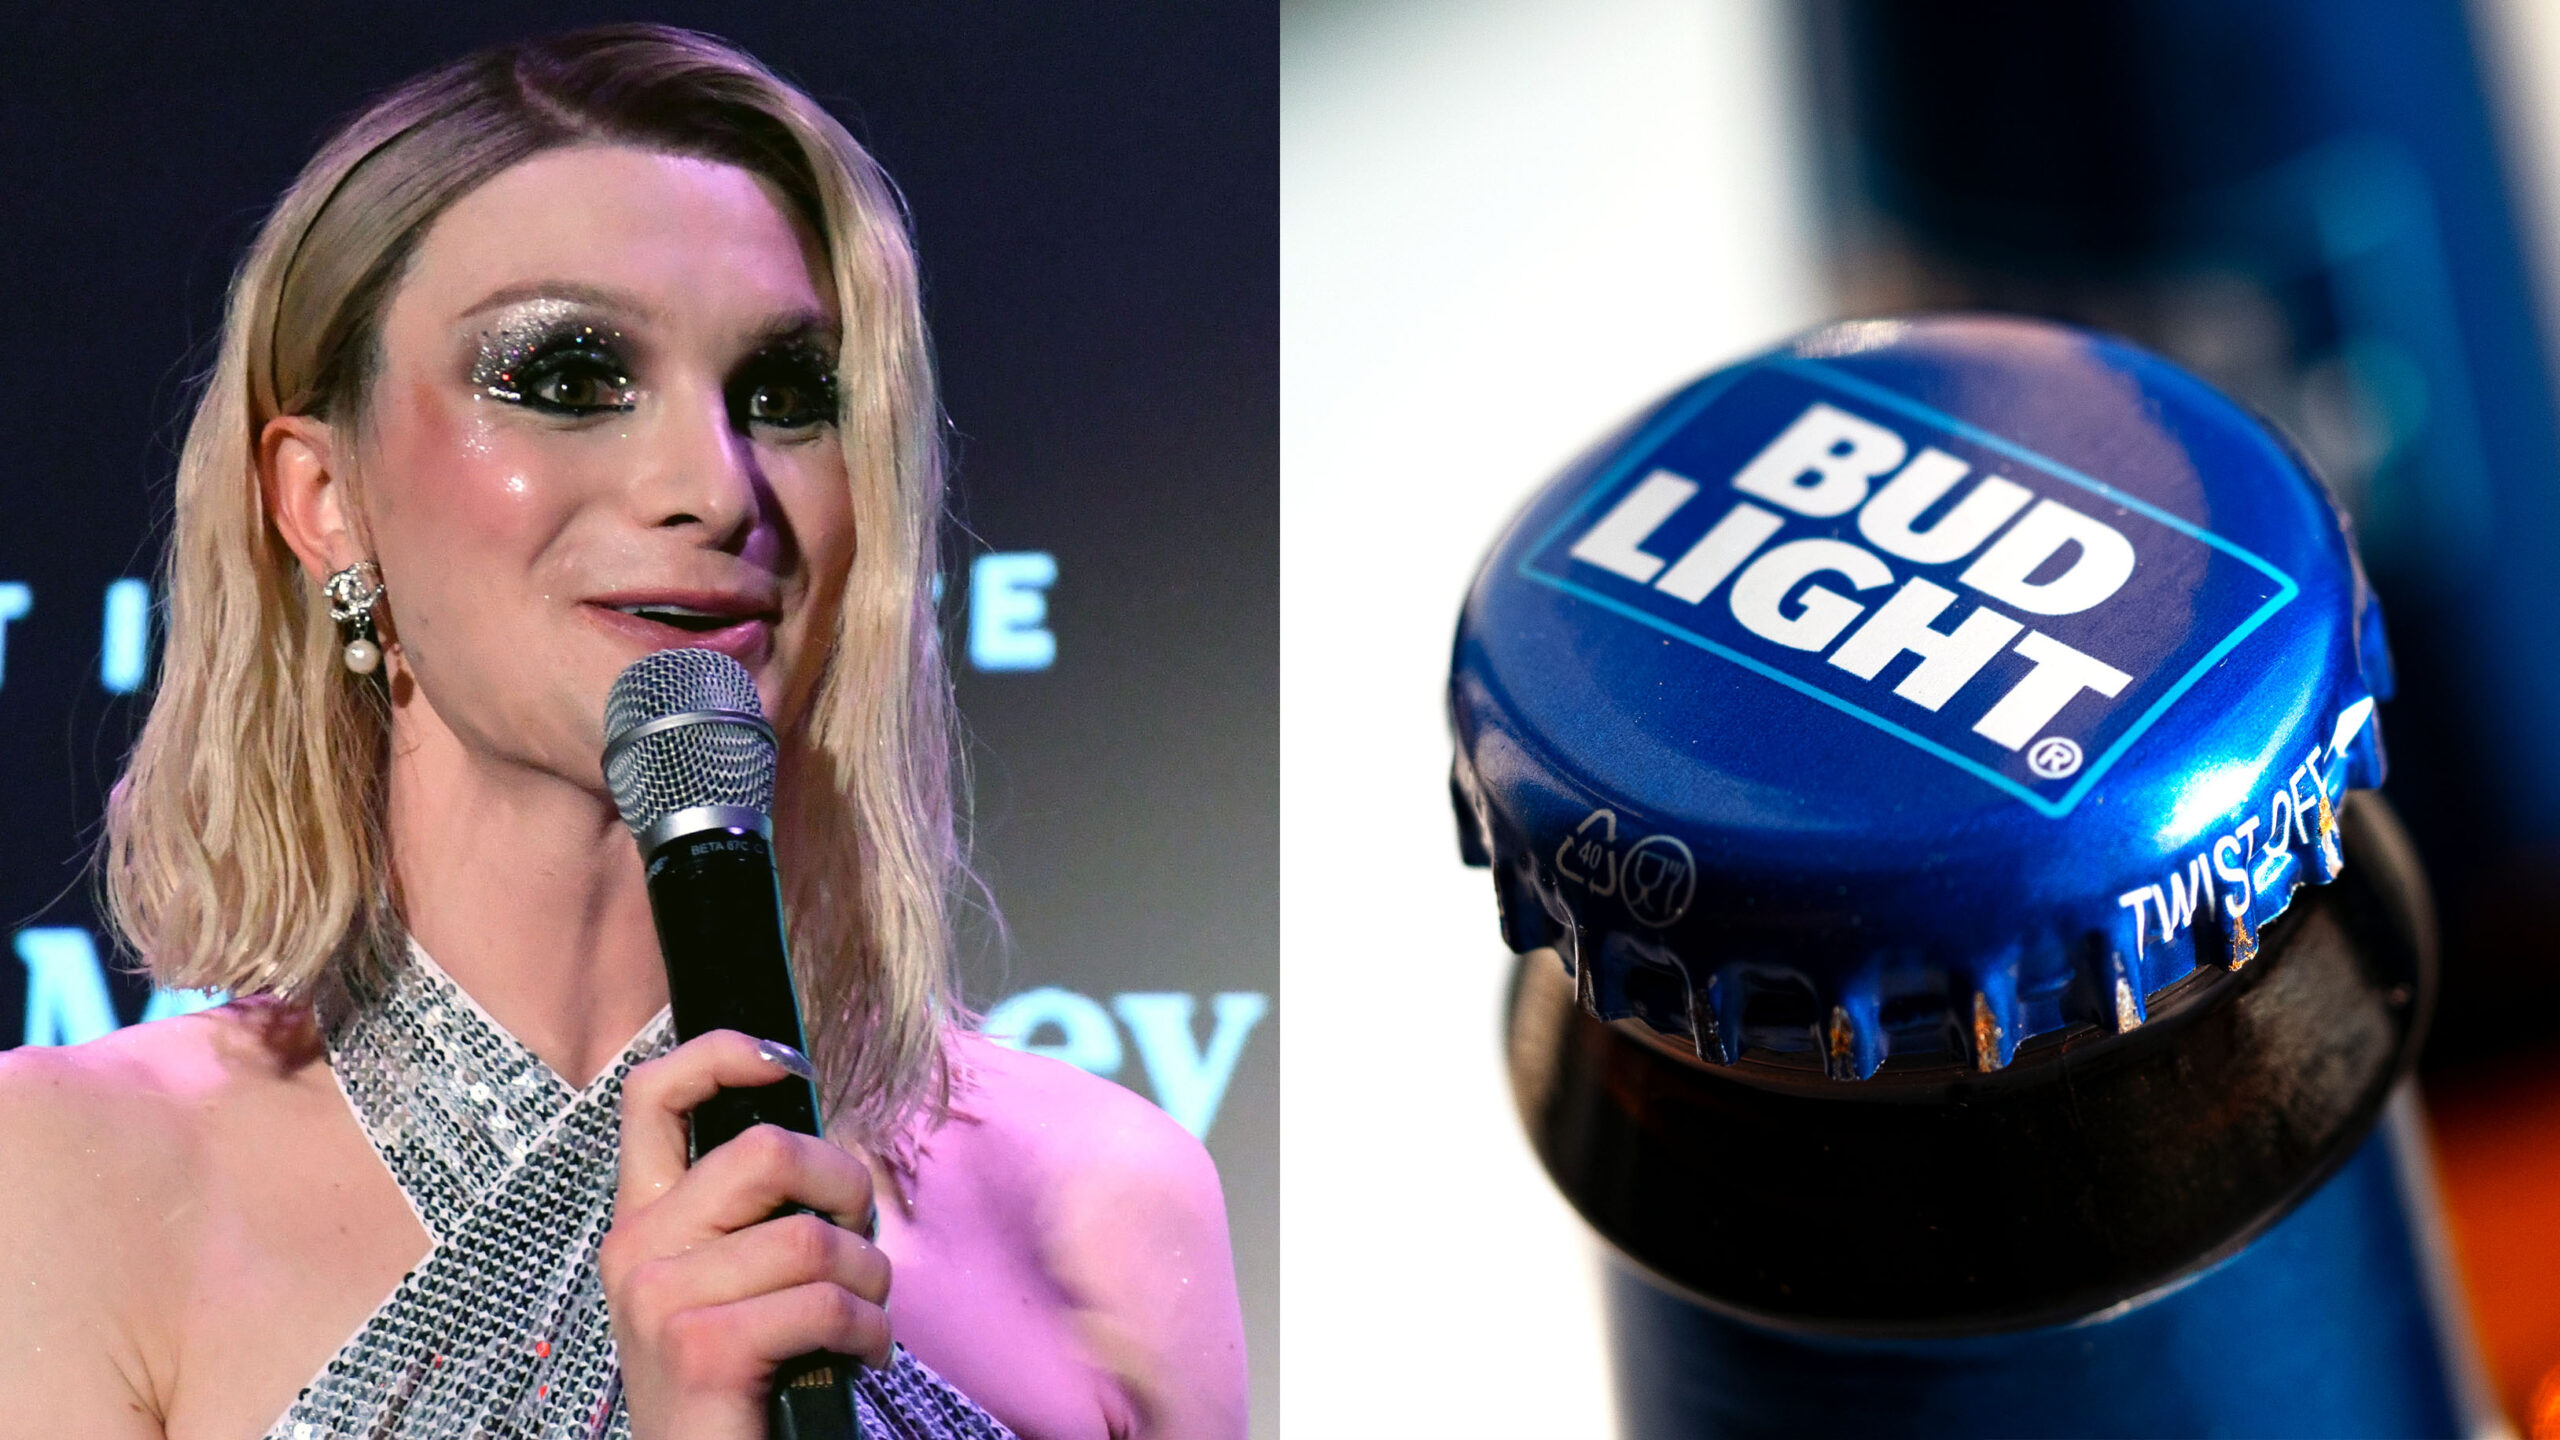 Bud Light’s Dylan Mulvaney incident prompts beer industry to revamp ad standards